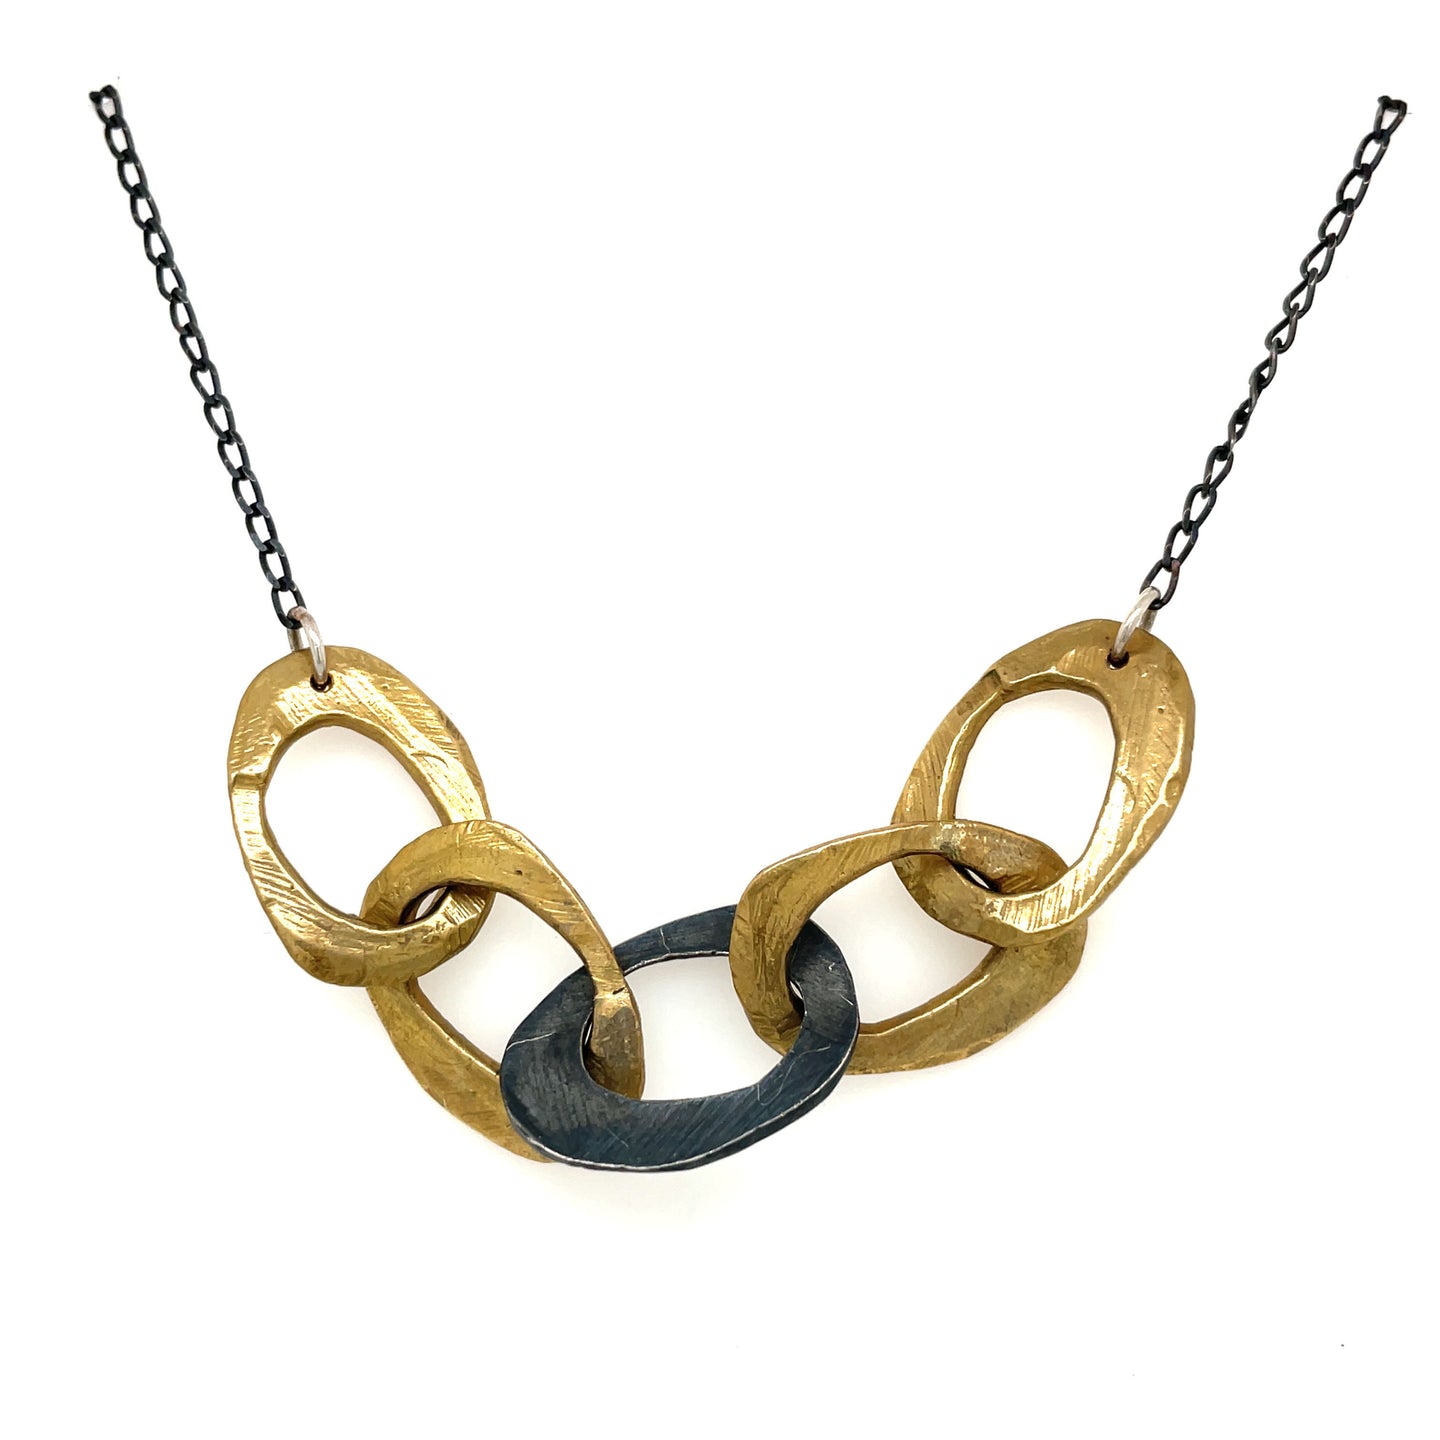 Silver and Bronze Oval Link Necklace